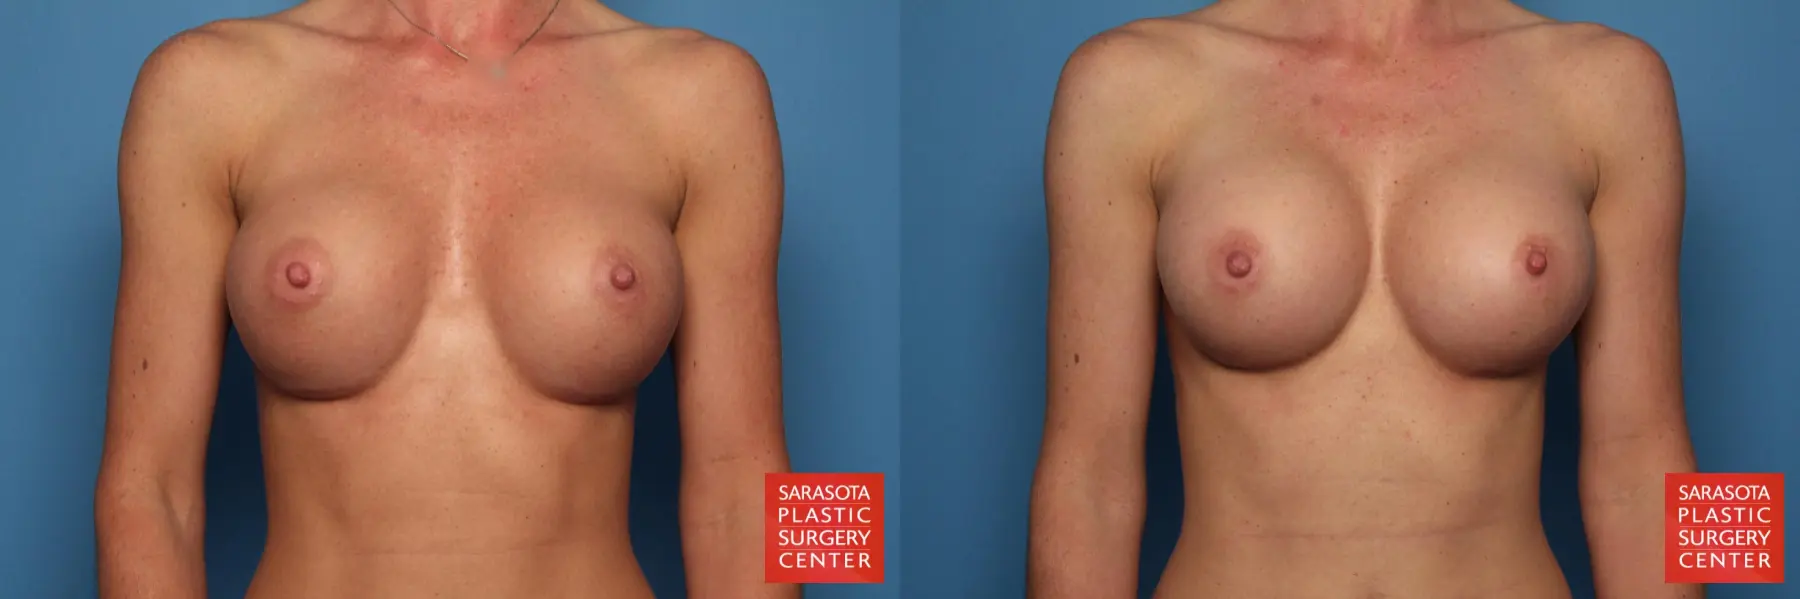 Breast Implant Removal/Replacement: Patient 4 - Before and After  